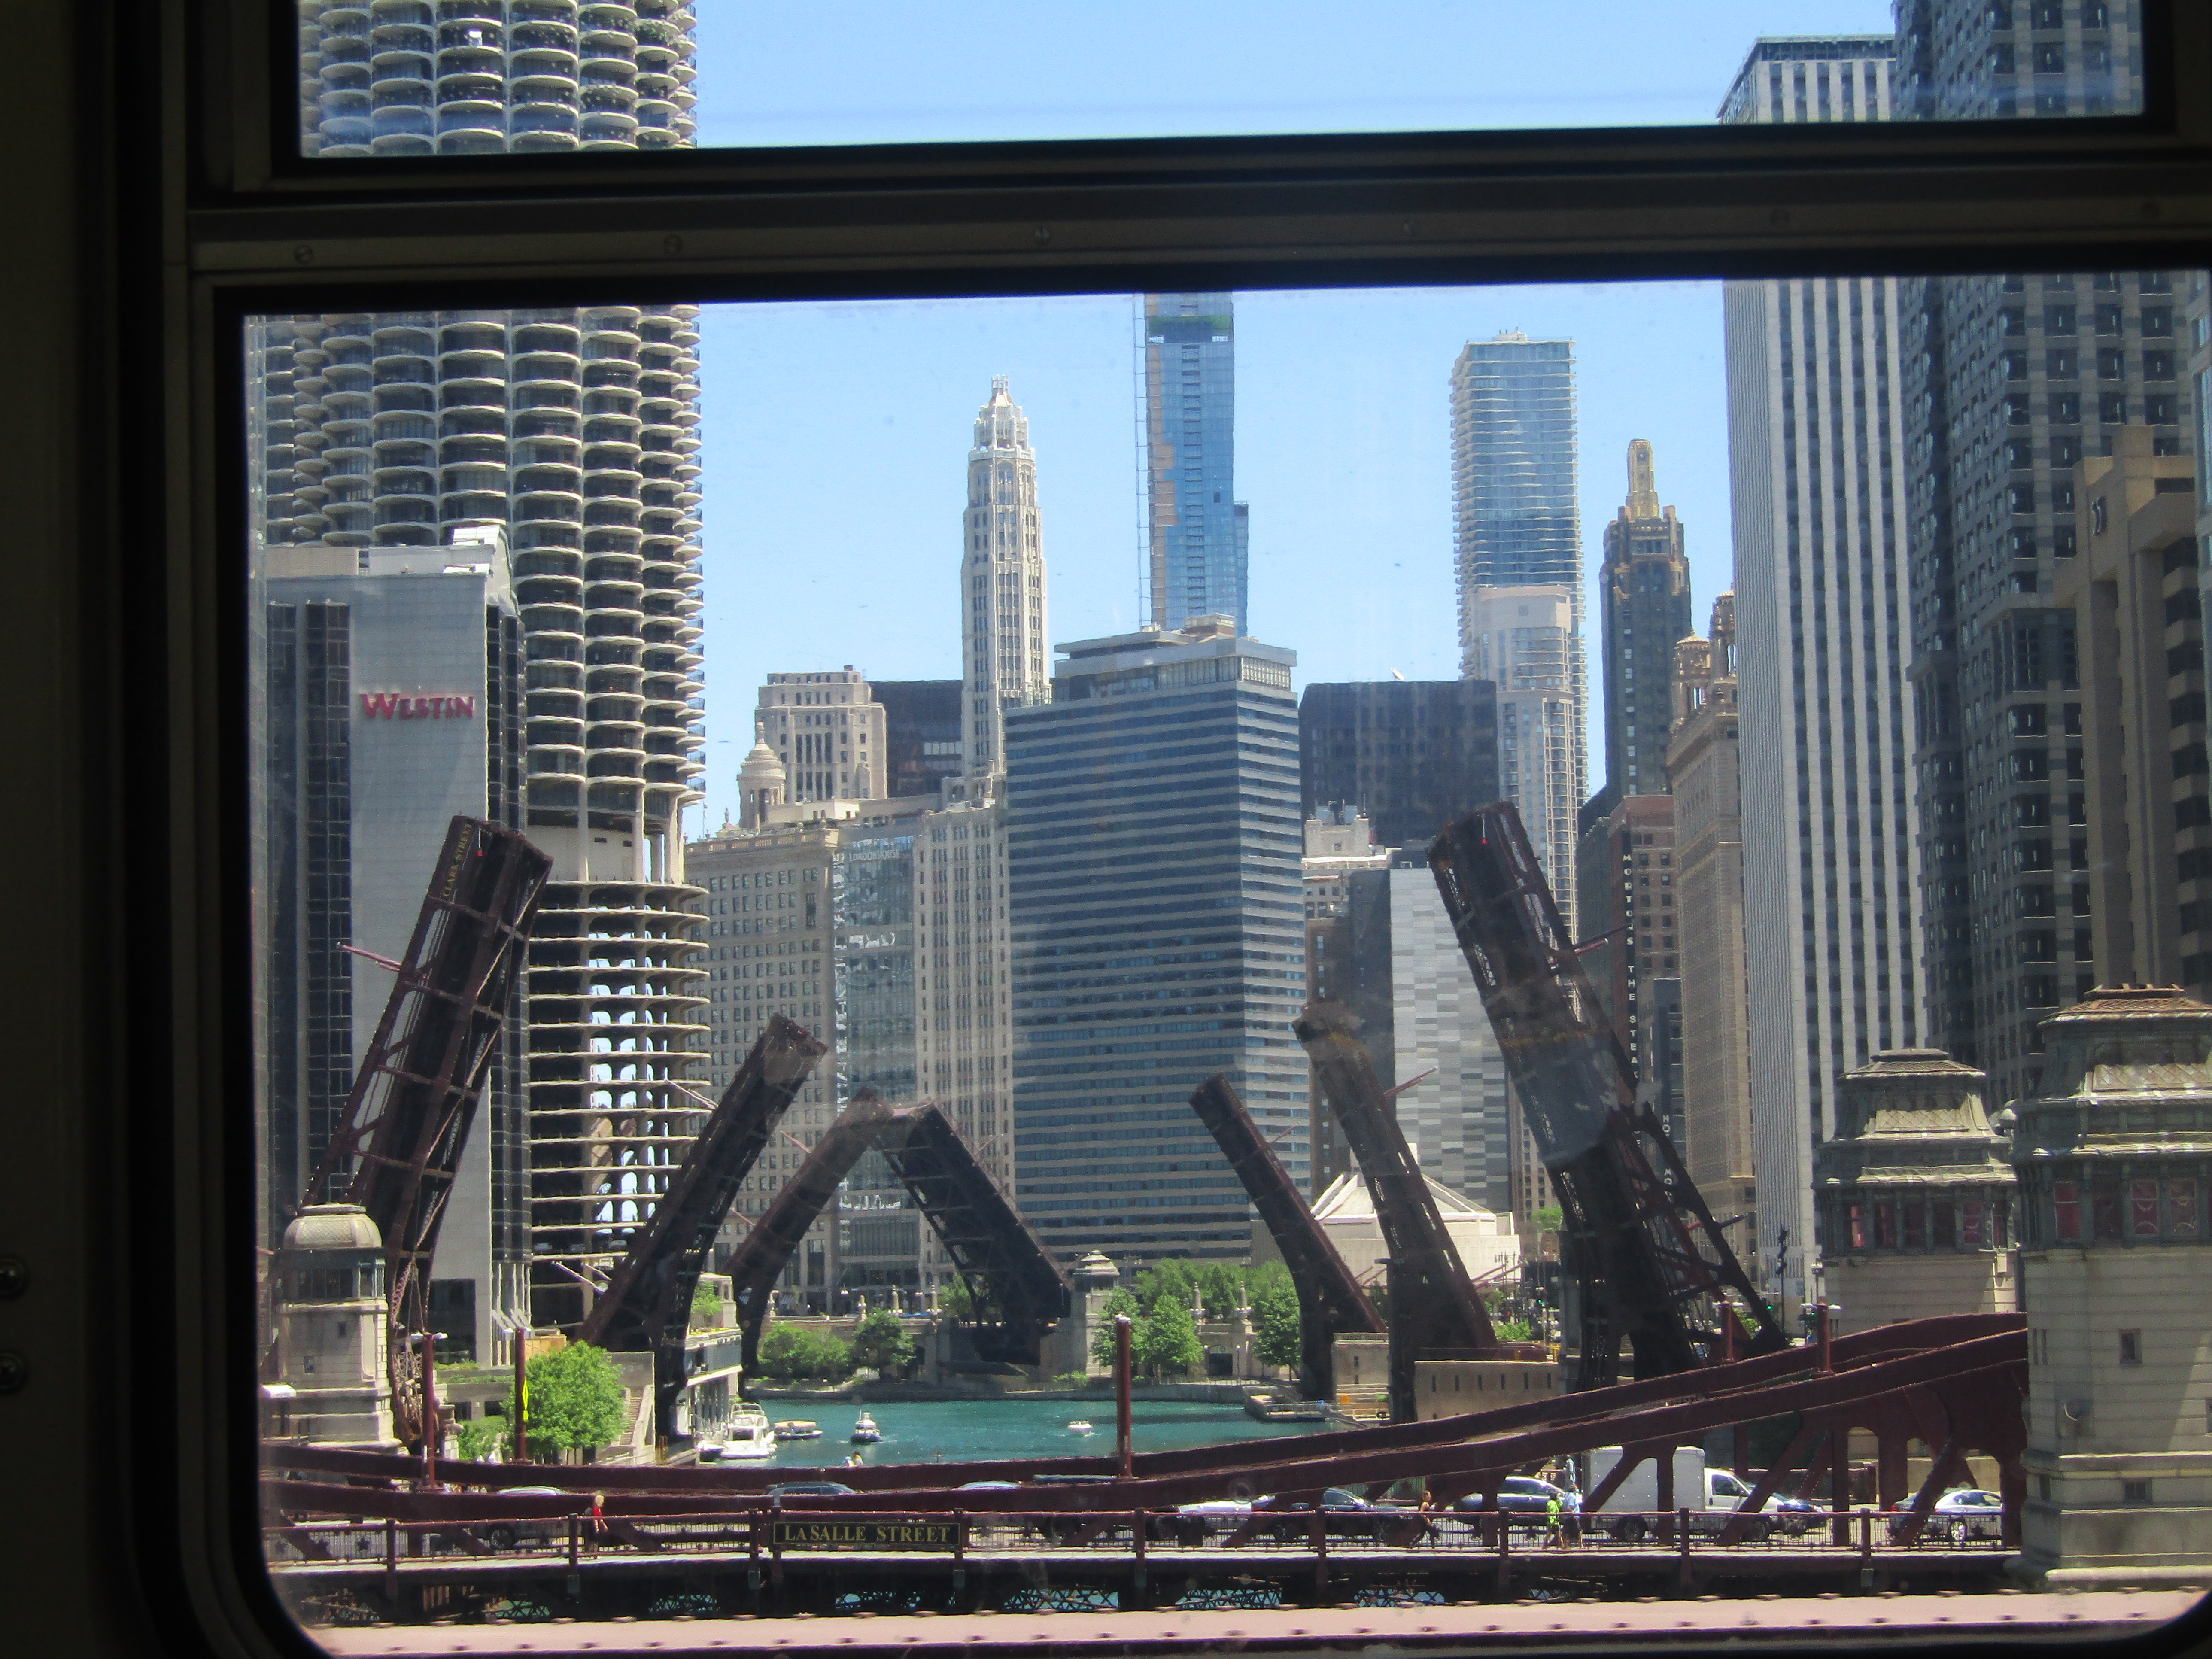 Bridges raised over Chicago River - a view from the 'L' - Looking east